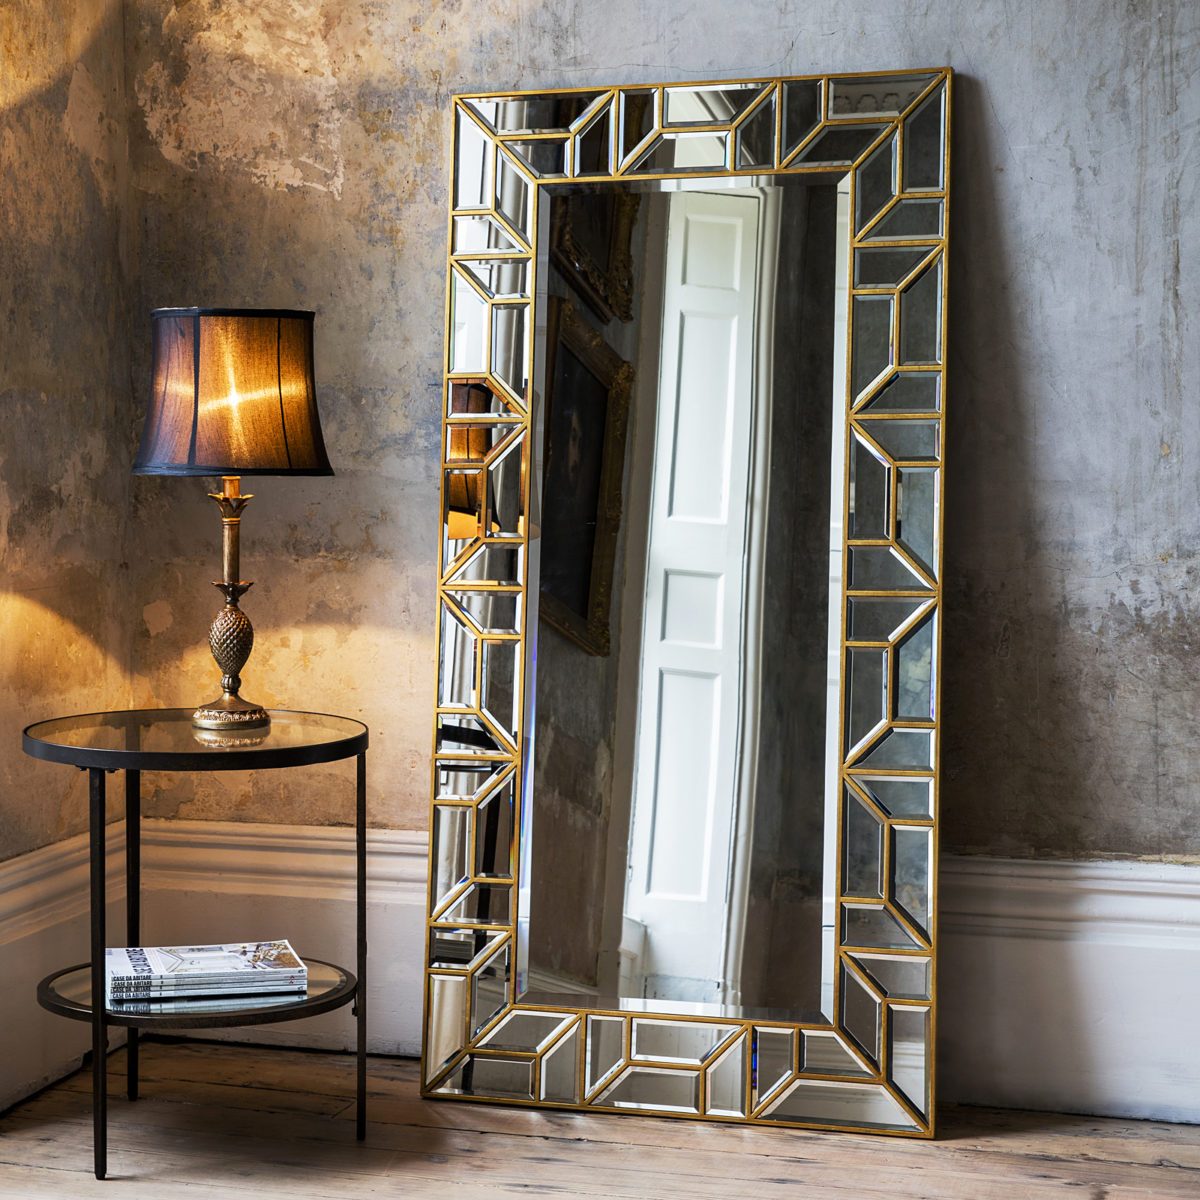 Floor Mirrors Decorative: Reflections Of Style And Beauty